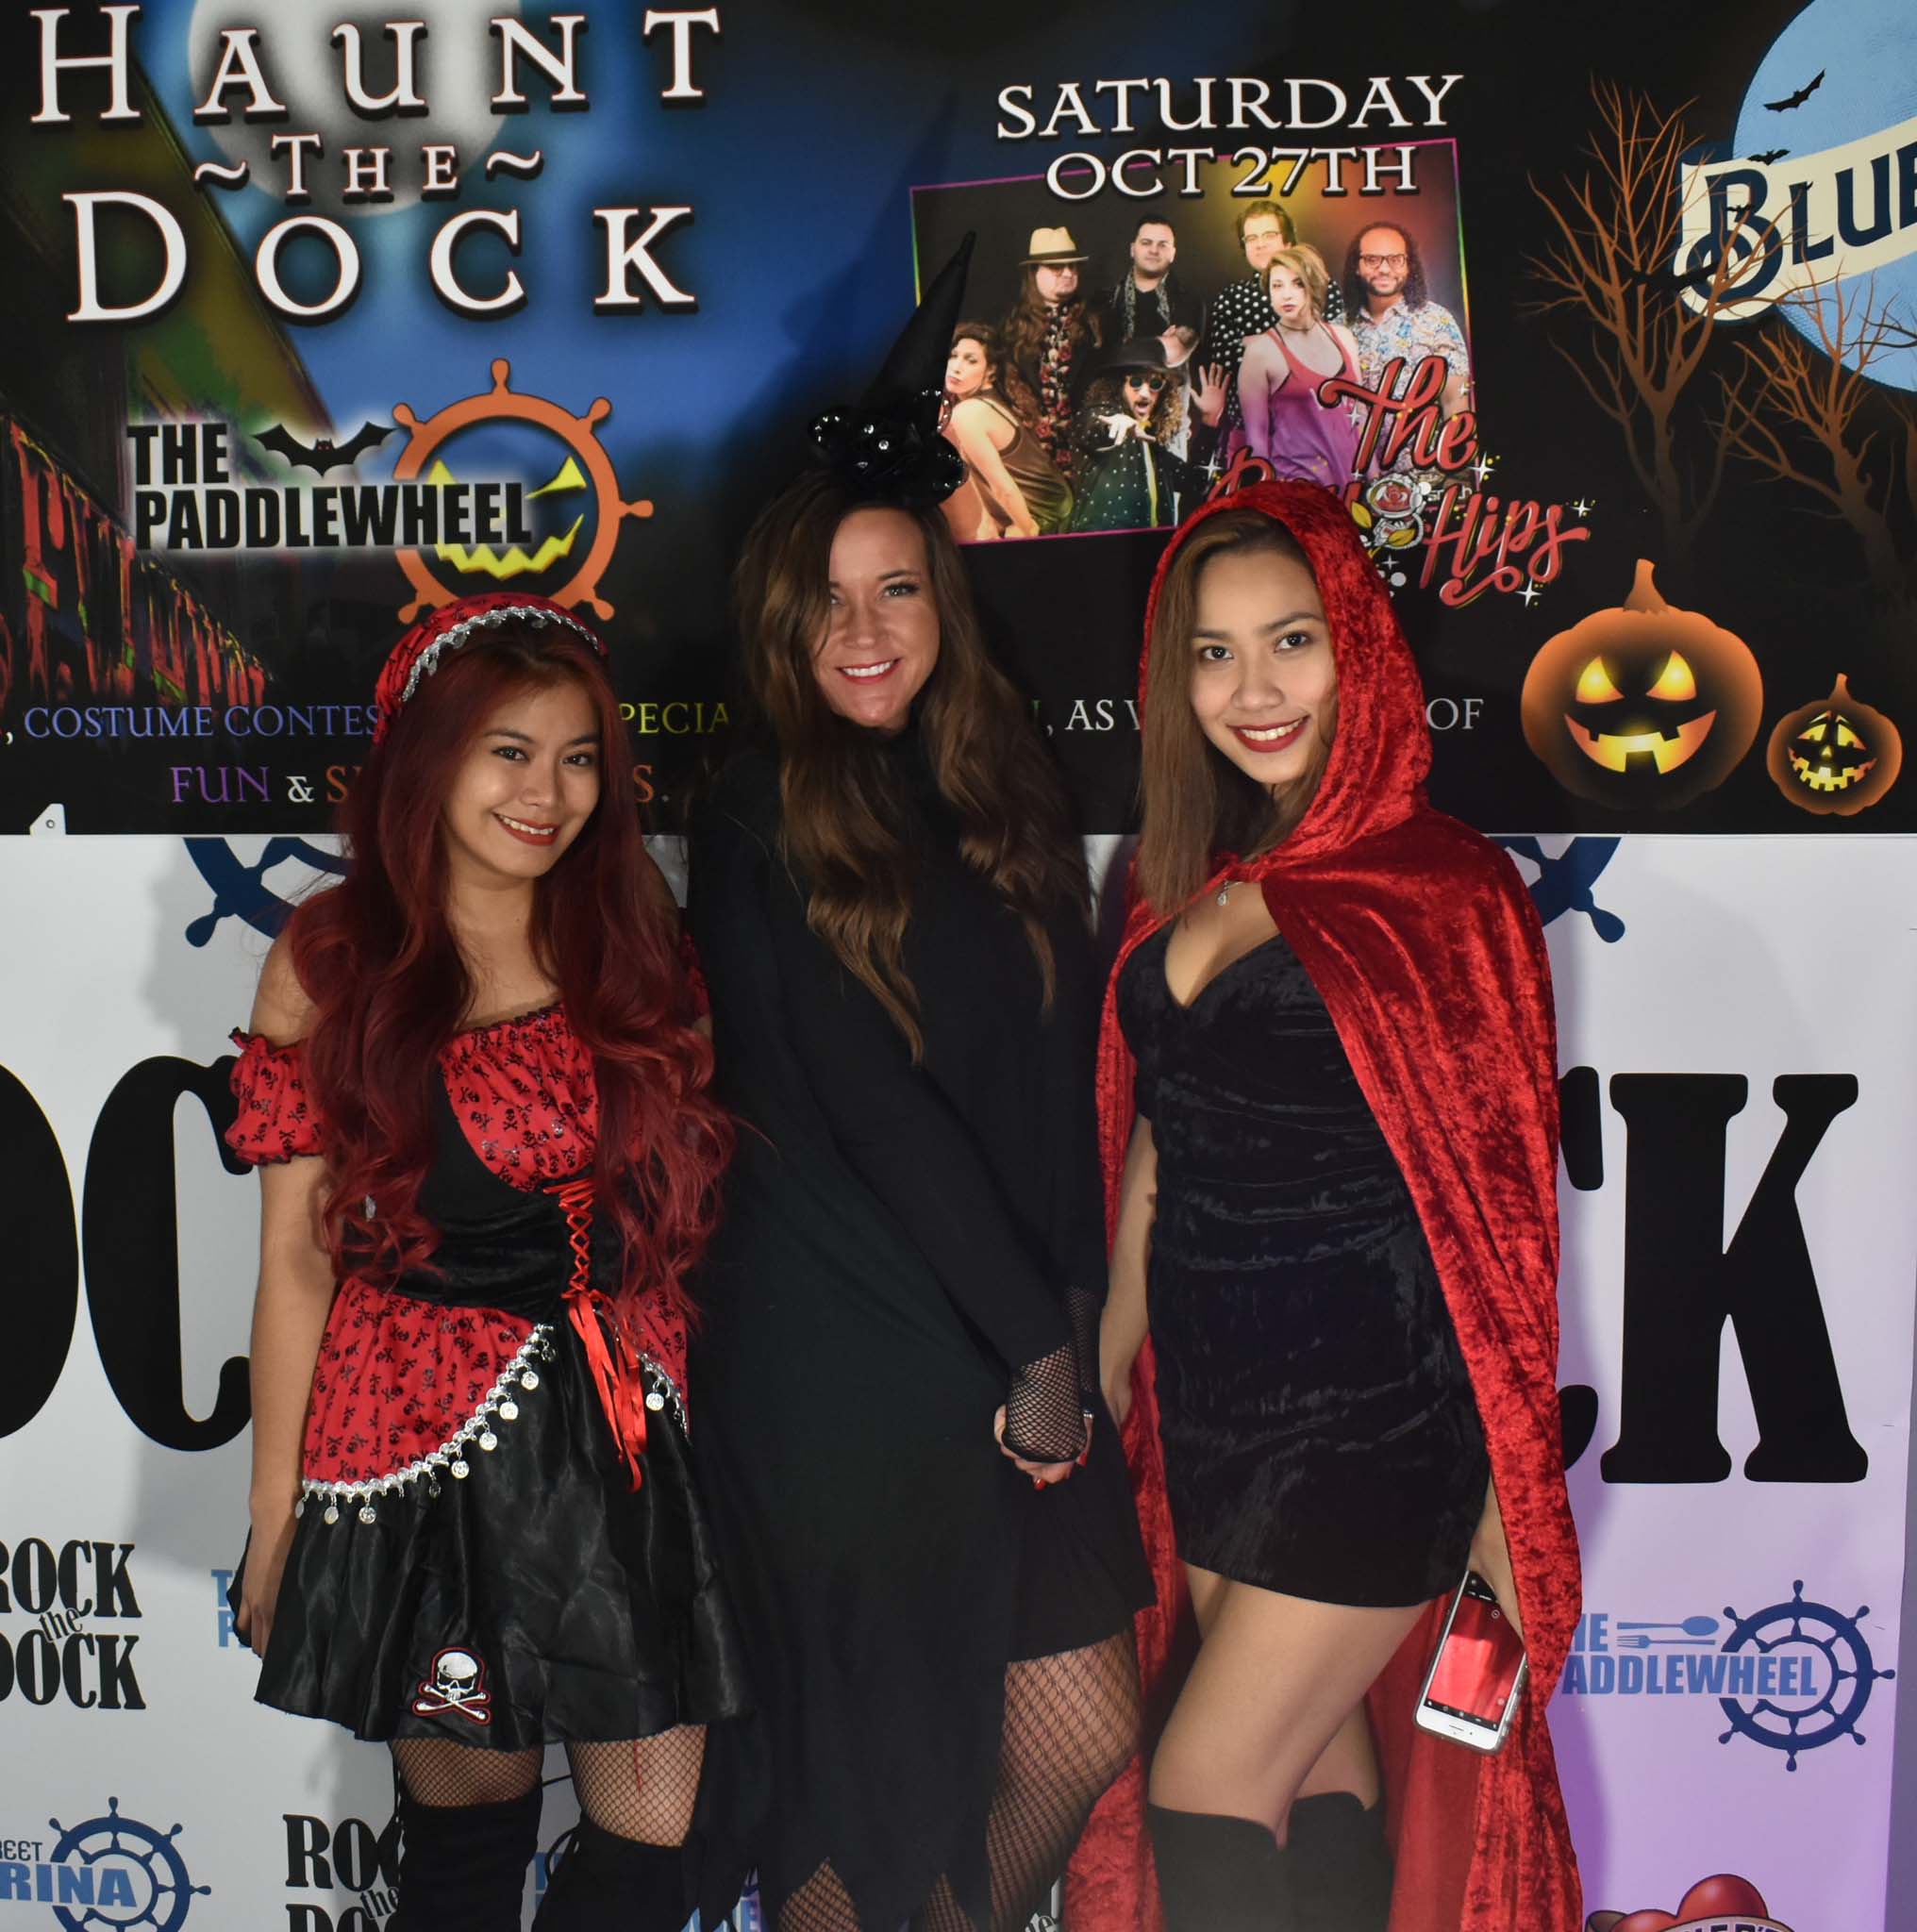 Haunt The Dock at The Paddlewheel